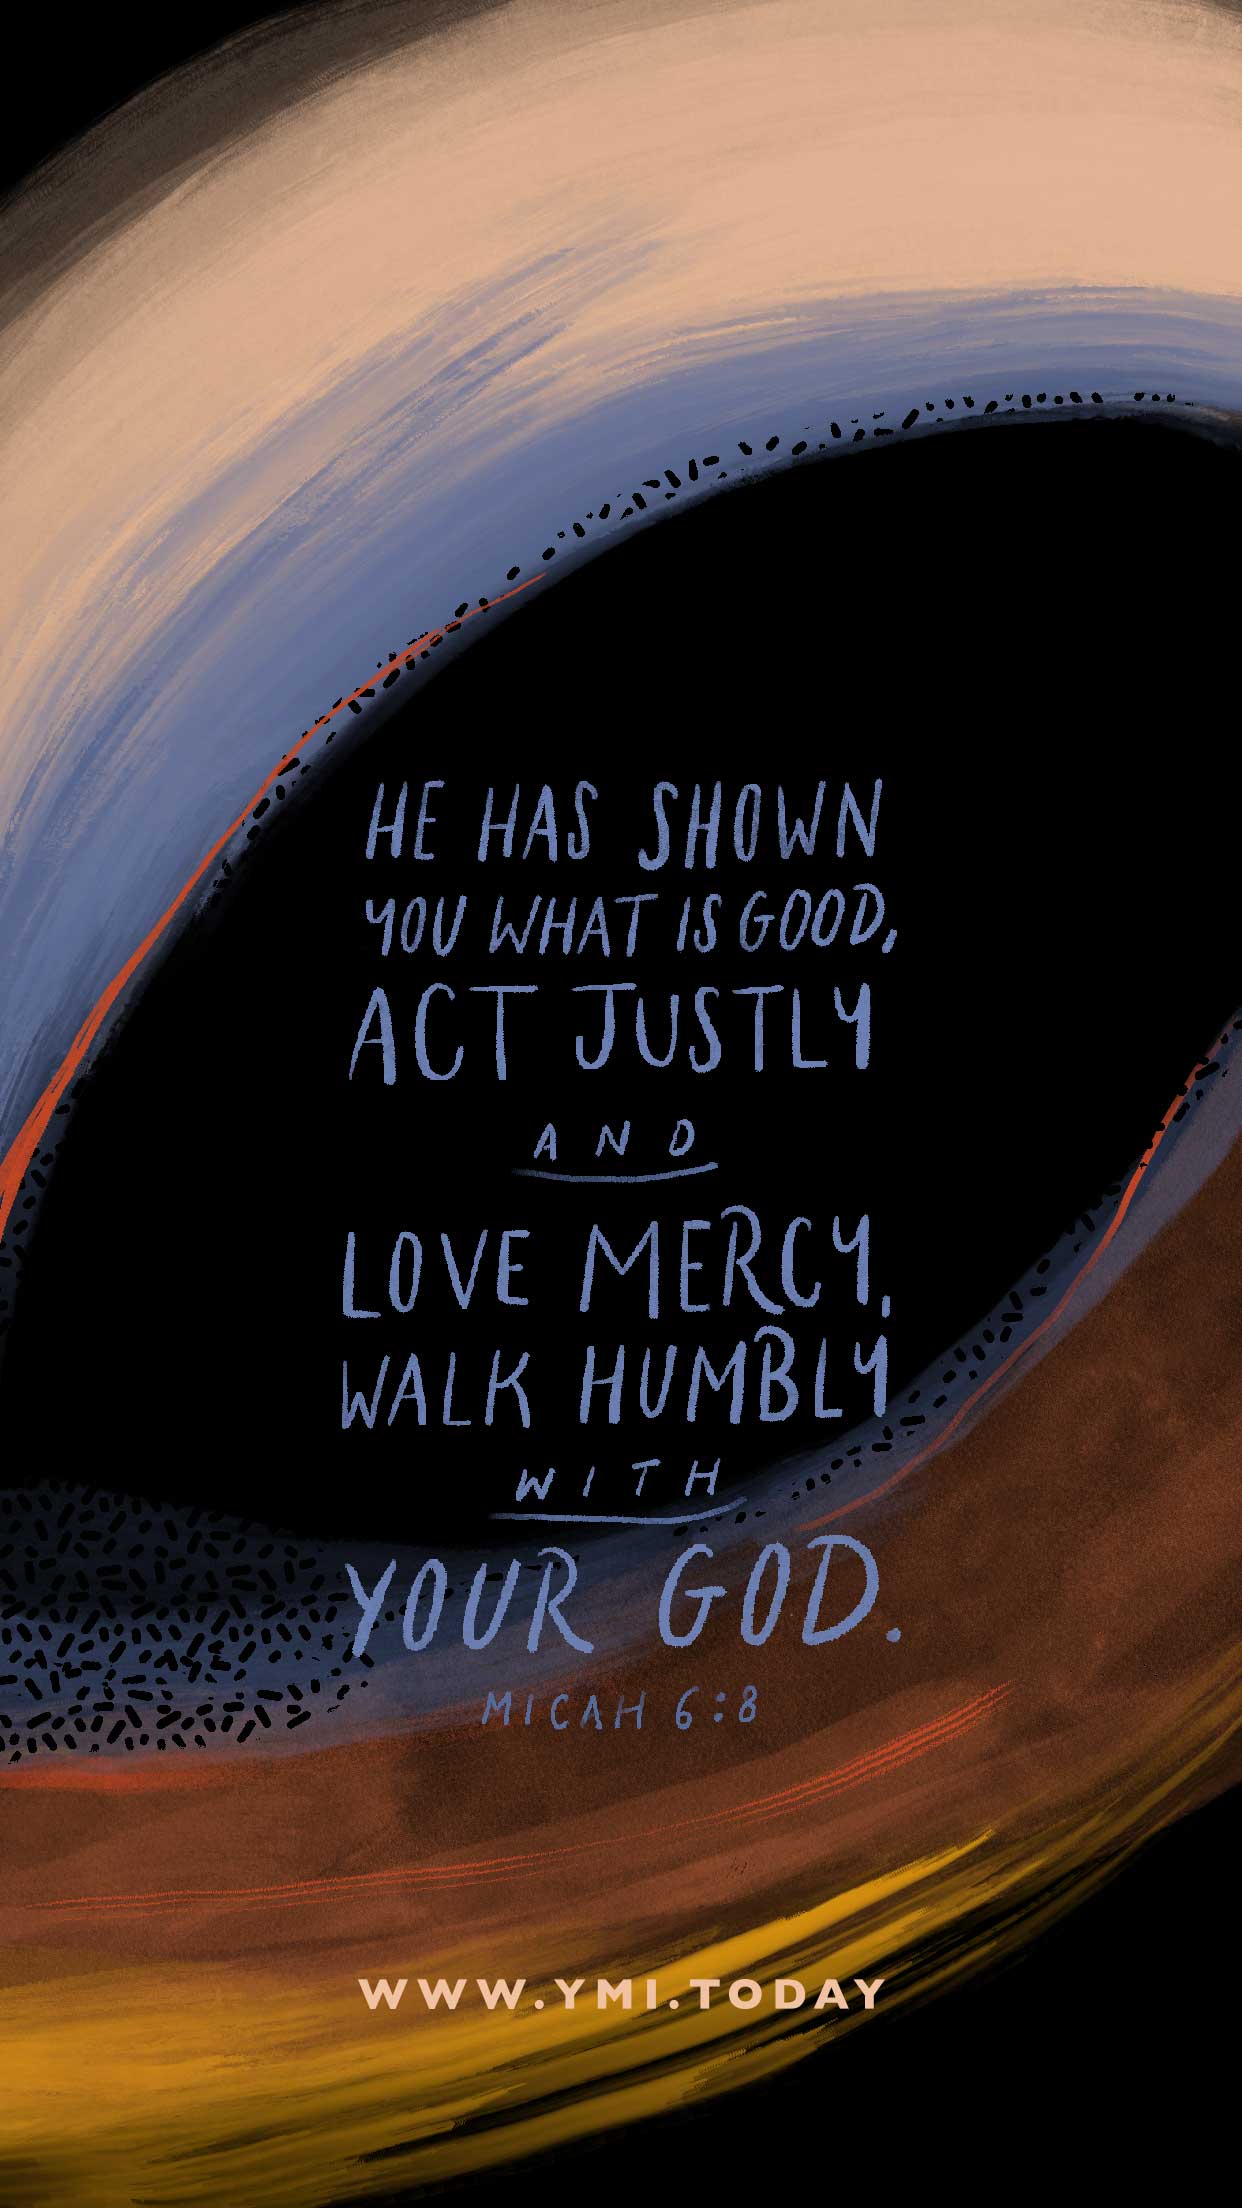 YMI July 2020 Phone Lockscreen - He has shown you what is good, act justly and love mercy, walk humbly with your God. - Micah 6:8